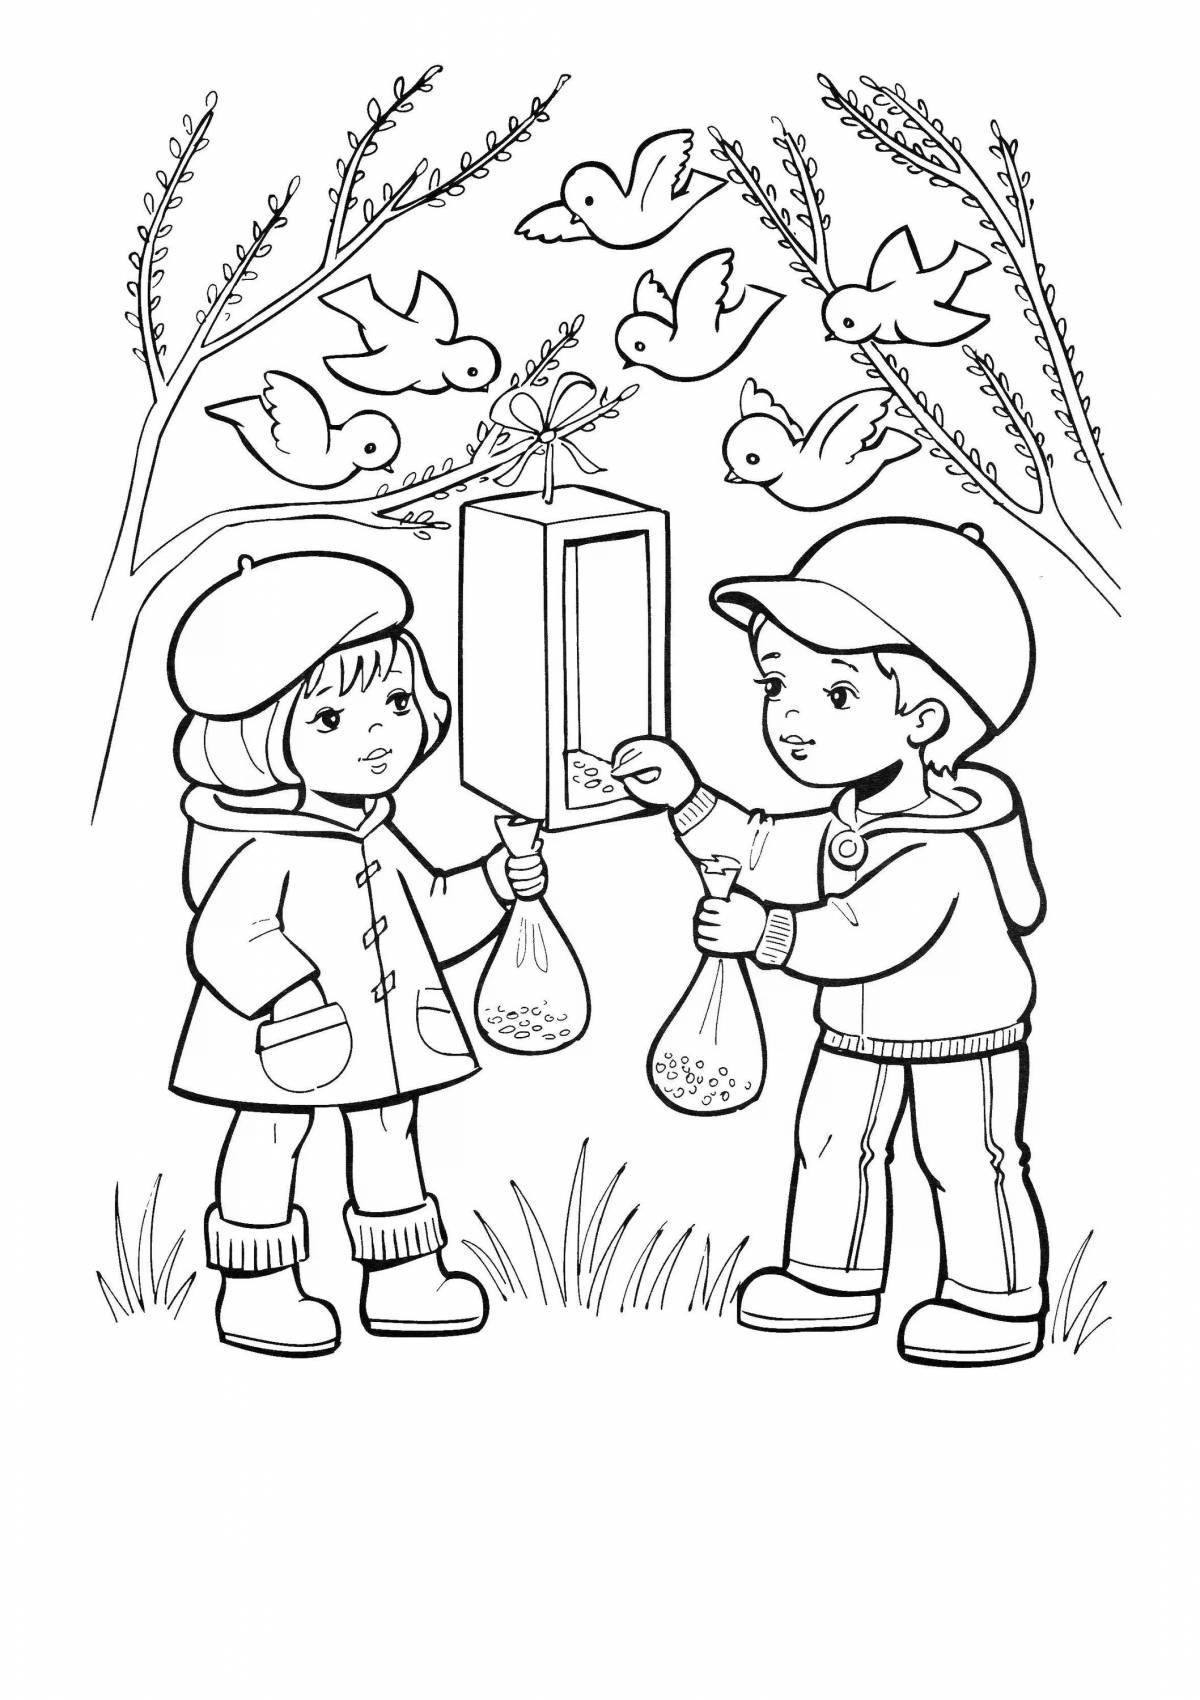 Glowing kindness coloring page